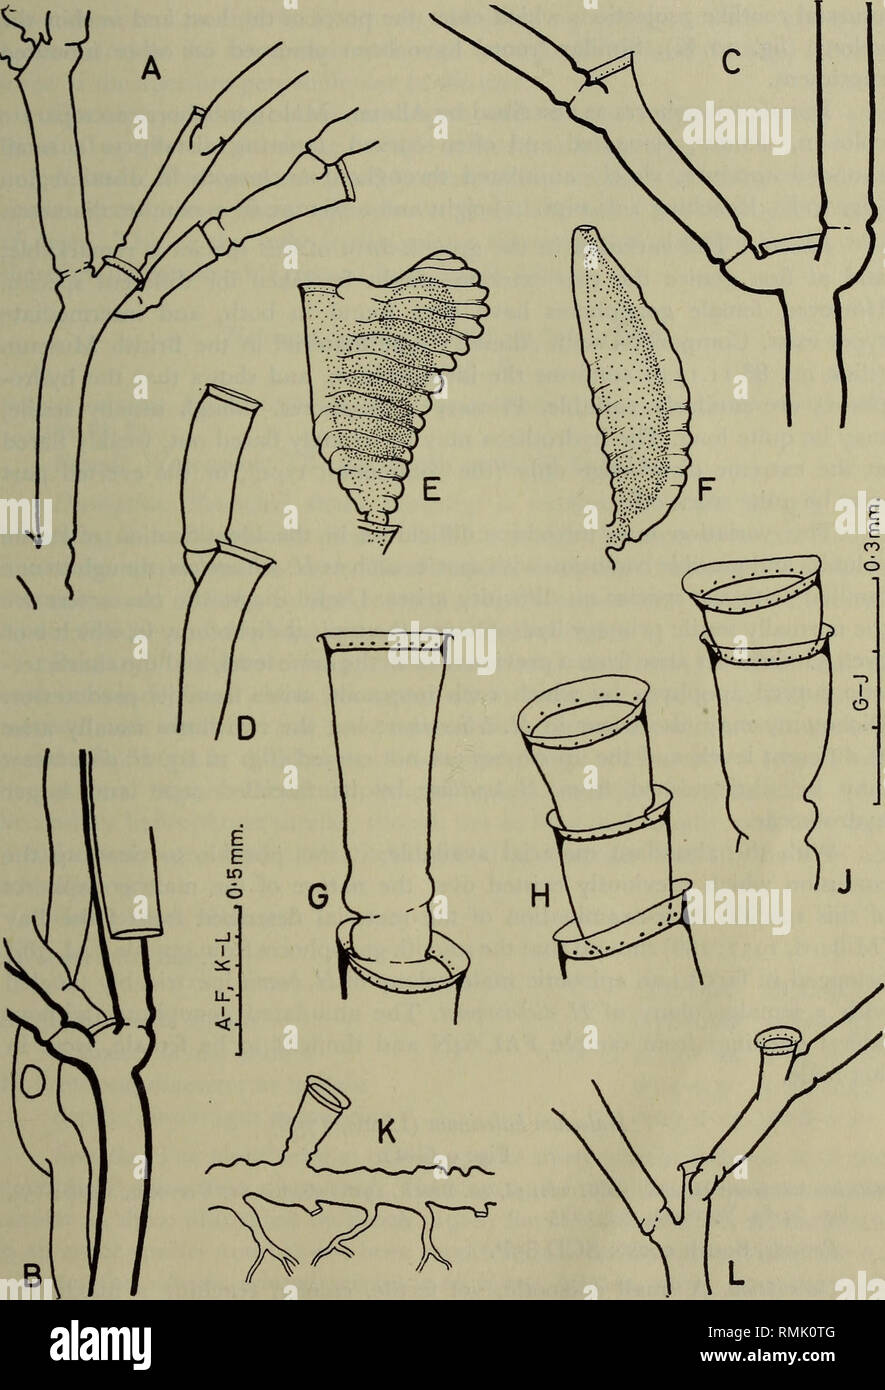 . Annals of the South African Museum. Annale van die Suid-Afrikaanse Museum. HYDROZOA OF THE SOUTH AND WEST COASTS OF SOUTH AFRICA 4b7. Fig. 10. Halecium dichotomum Allman (A-K) and H. delicatulum Coughtrey (L). A and B. Portions of stem from the distal and proximal ends respectively of the tall form, to show the incorporation of one limb of the dichotomy into a main stem. Peripheral tubes teased apart in B. (TRA 92N.) C and D. Portions of stem from TRA 38J, showing typical dichotomy in C and a unilateral branch in D. E and F. Female and male gonophores. G-J. Details of secondary hydrophores.  Stock Photo